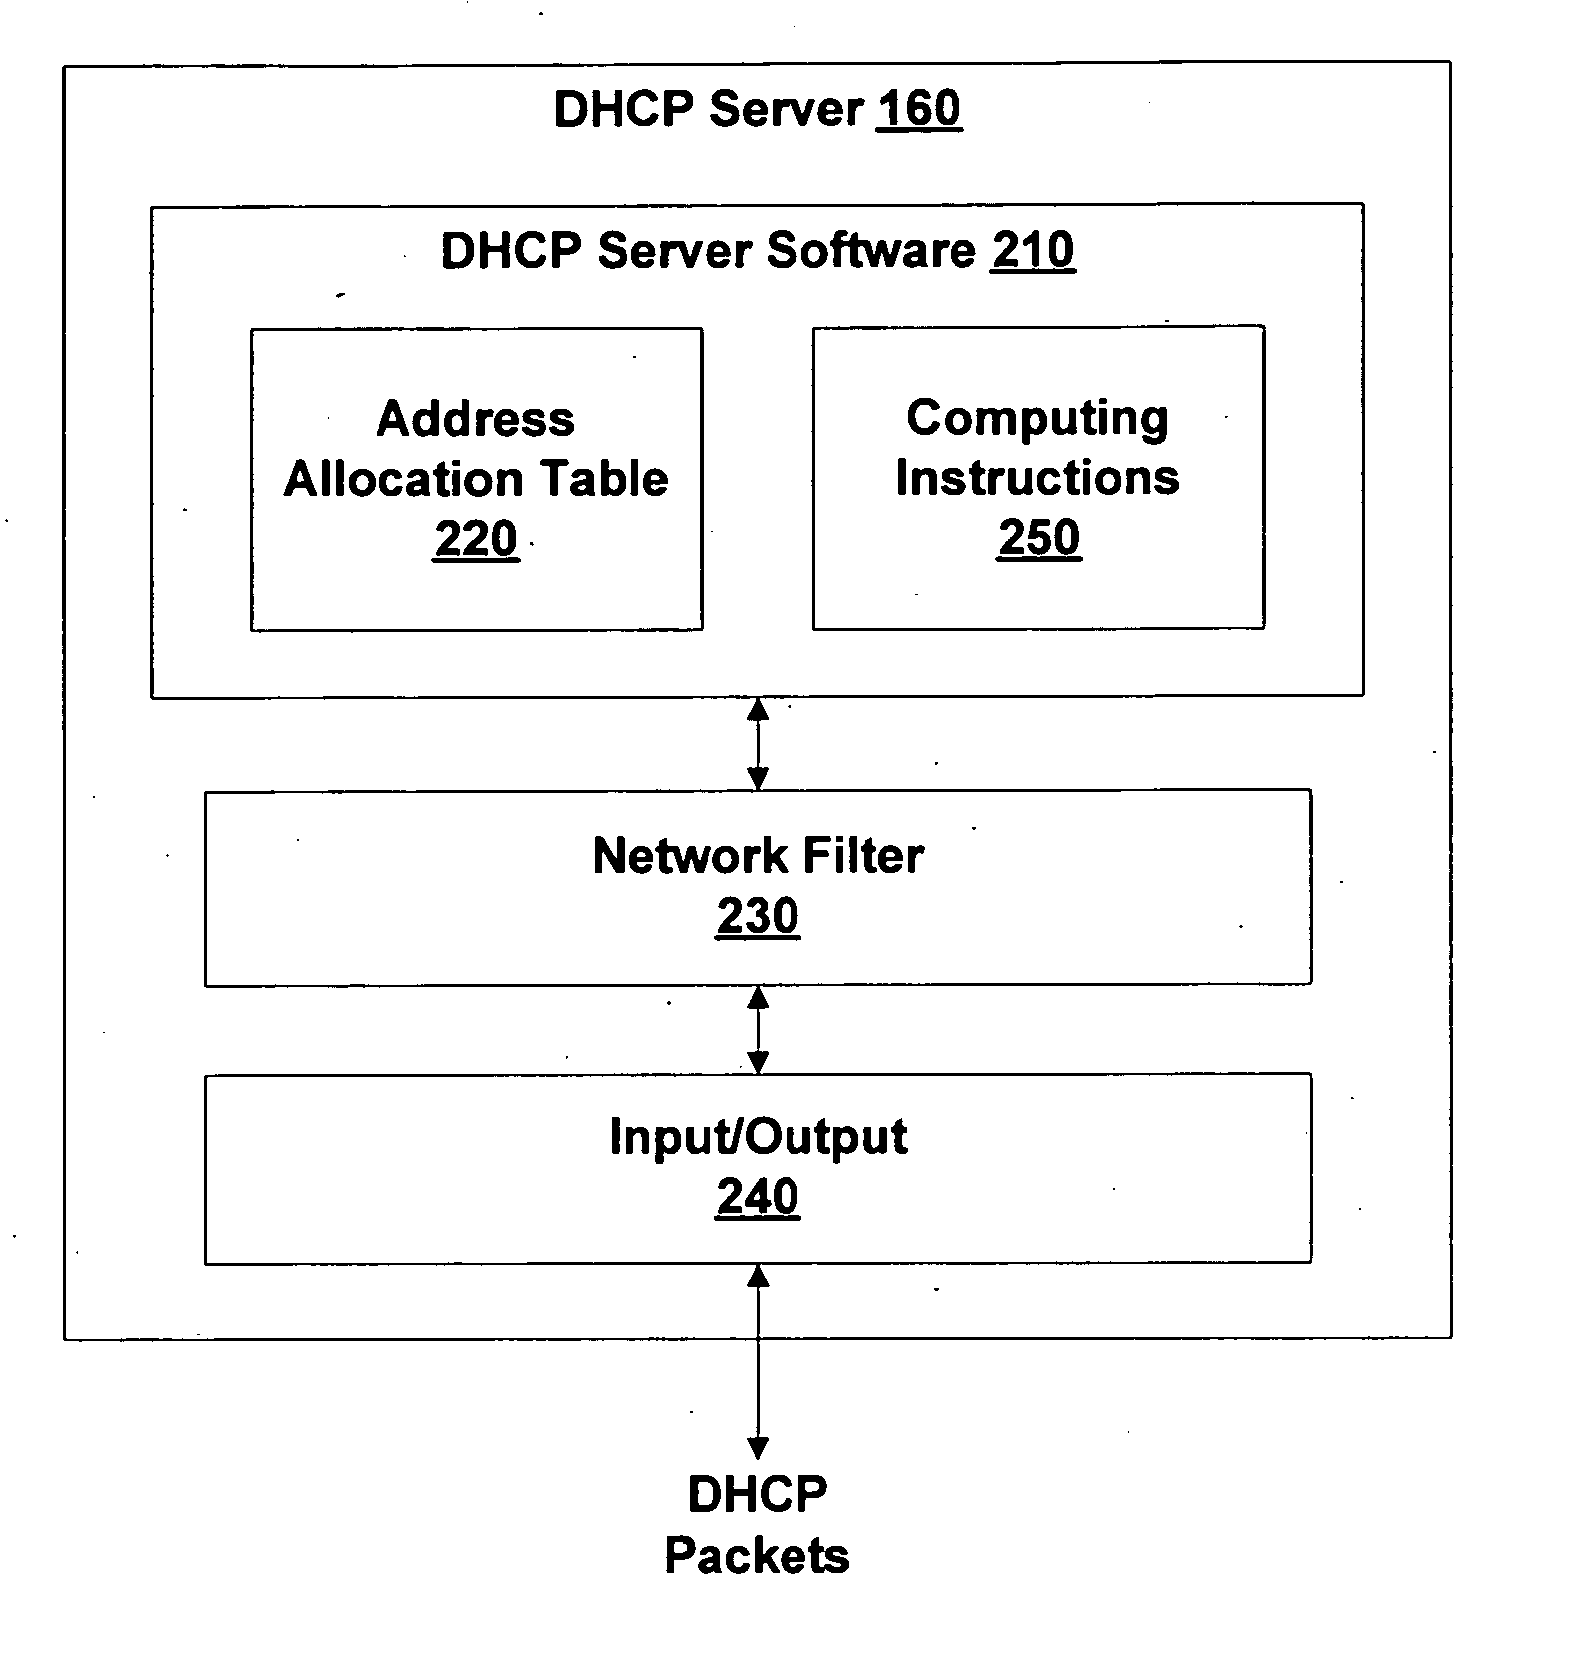 Dynamic address assignment for access control on DHCP networks